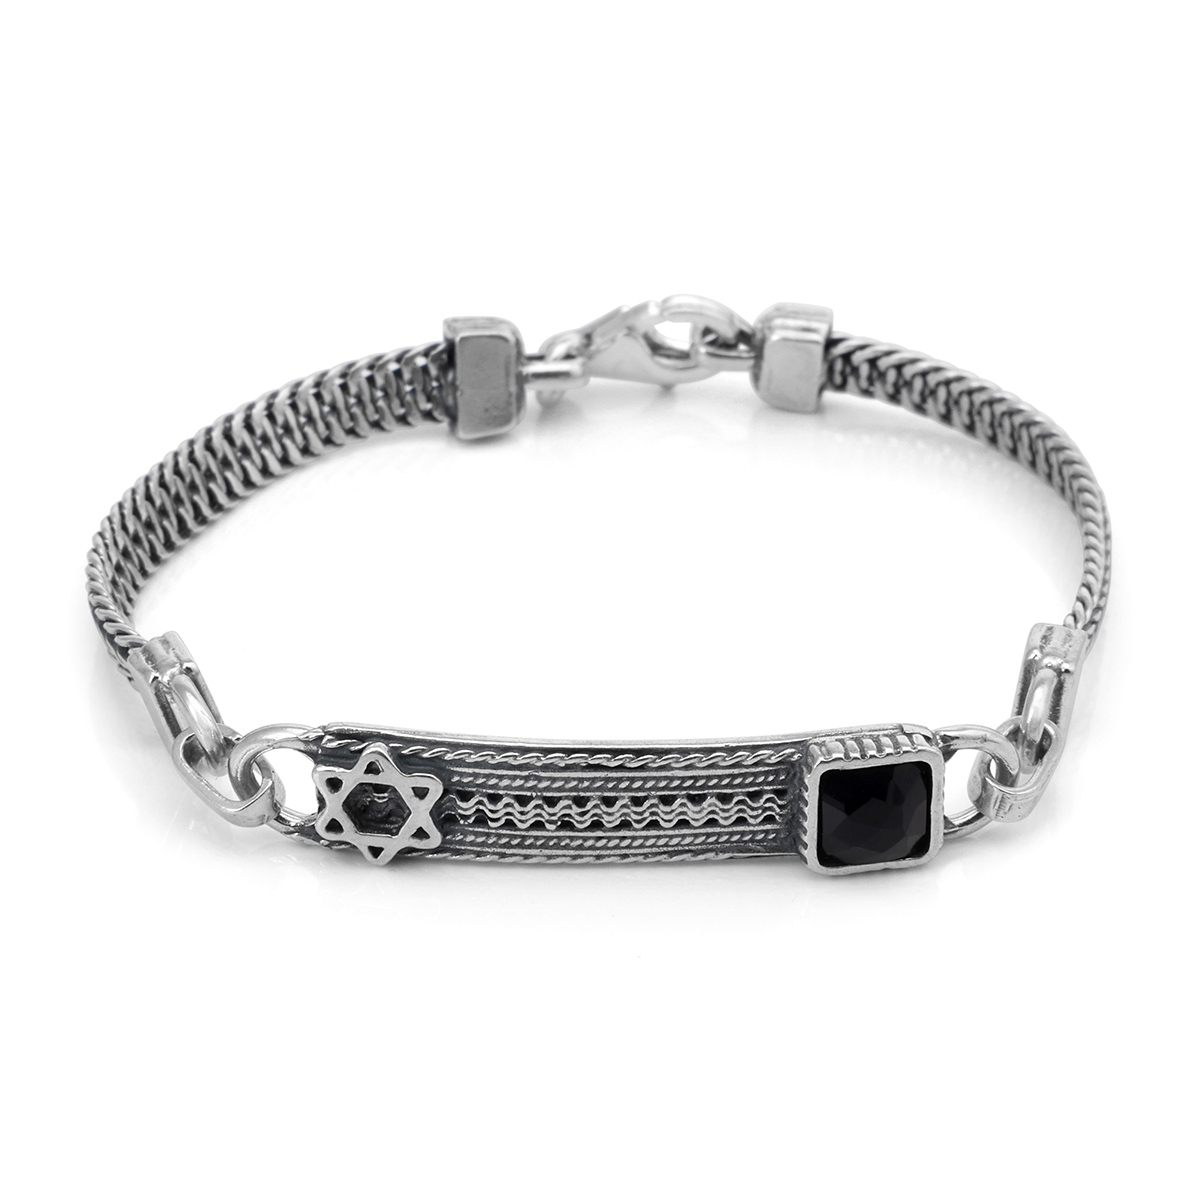 Star of David Men's Sterling Silver & Black Onyx Stone Bracelet With Priestly Blessing - 1